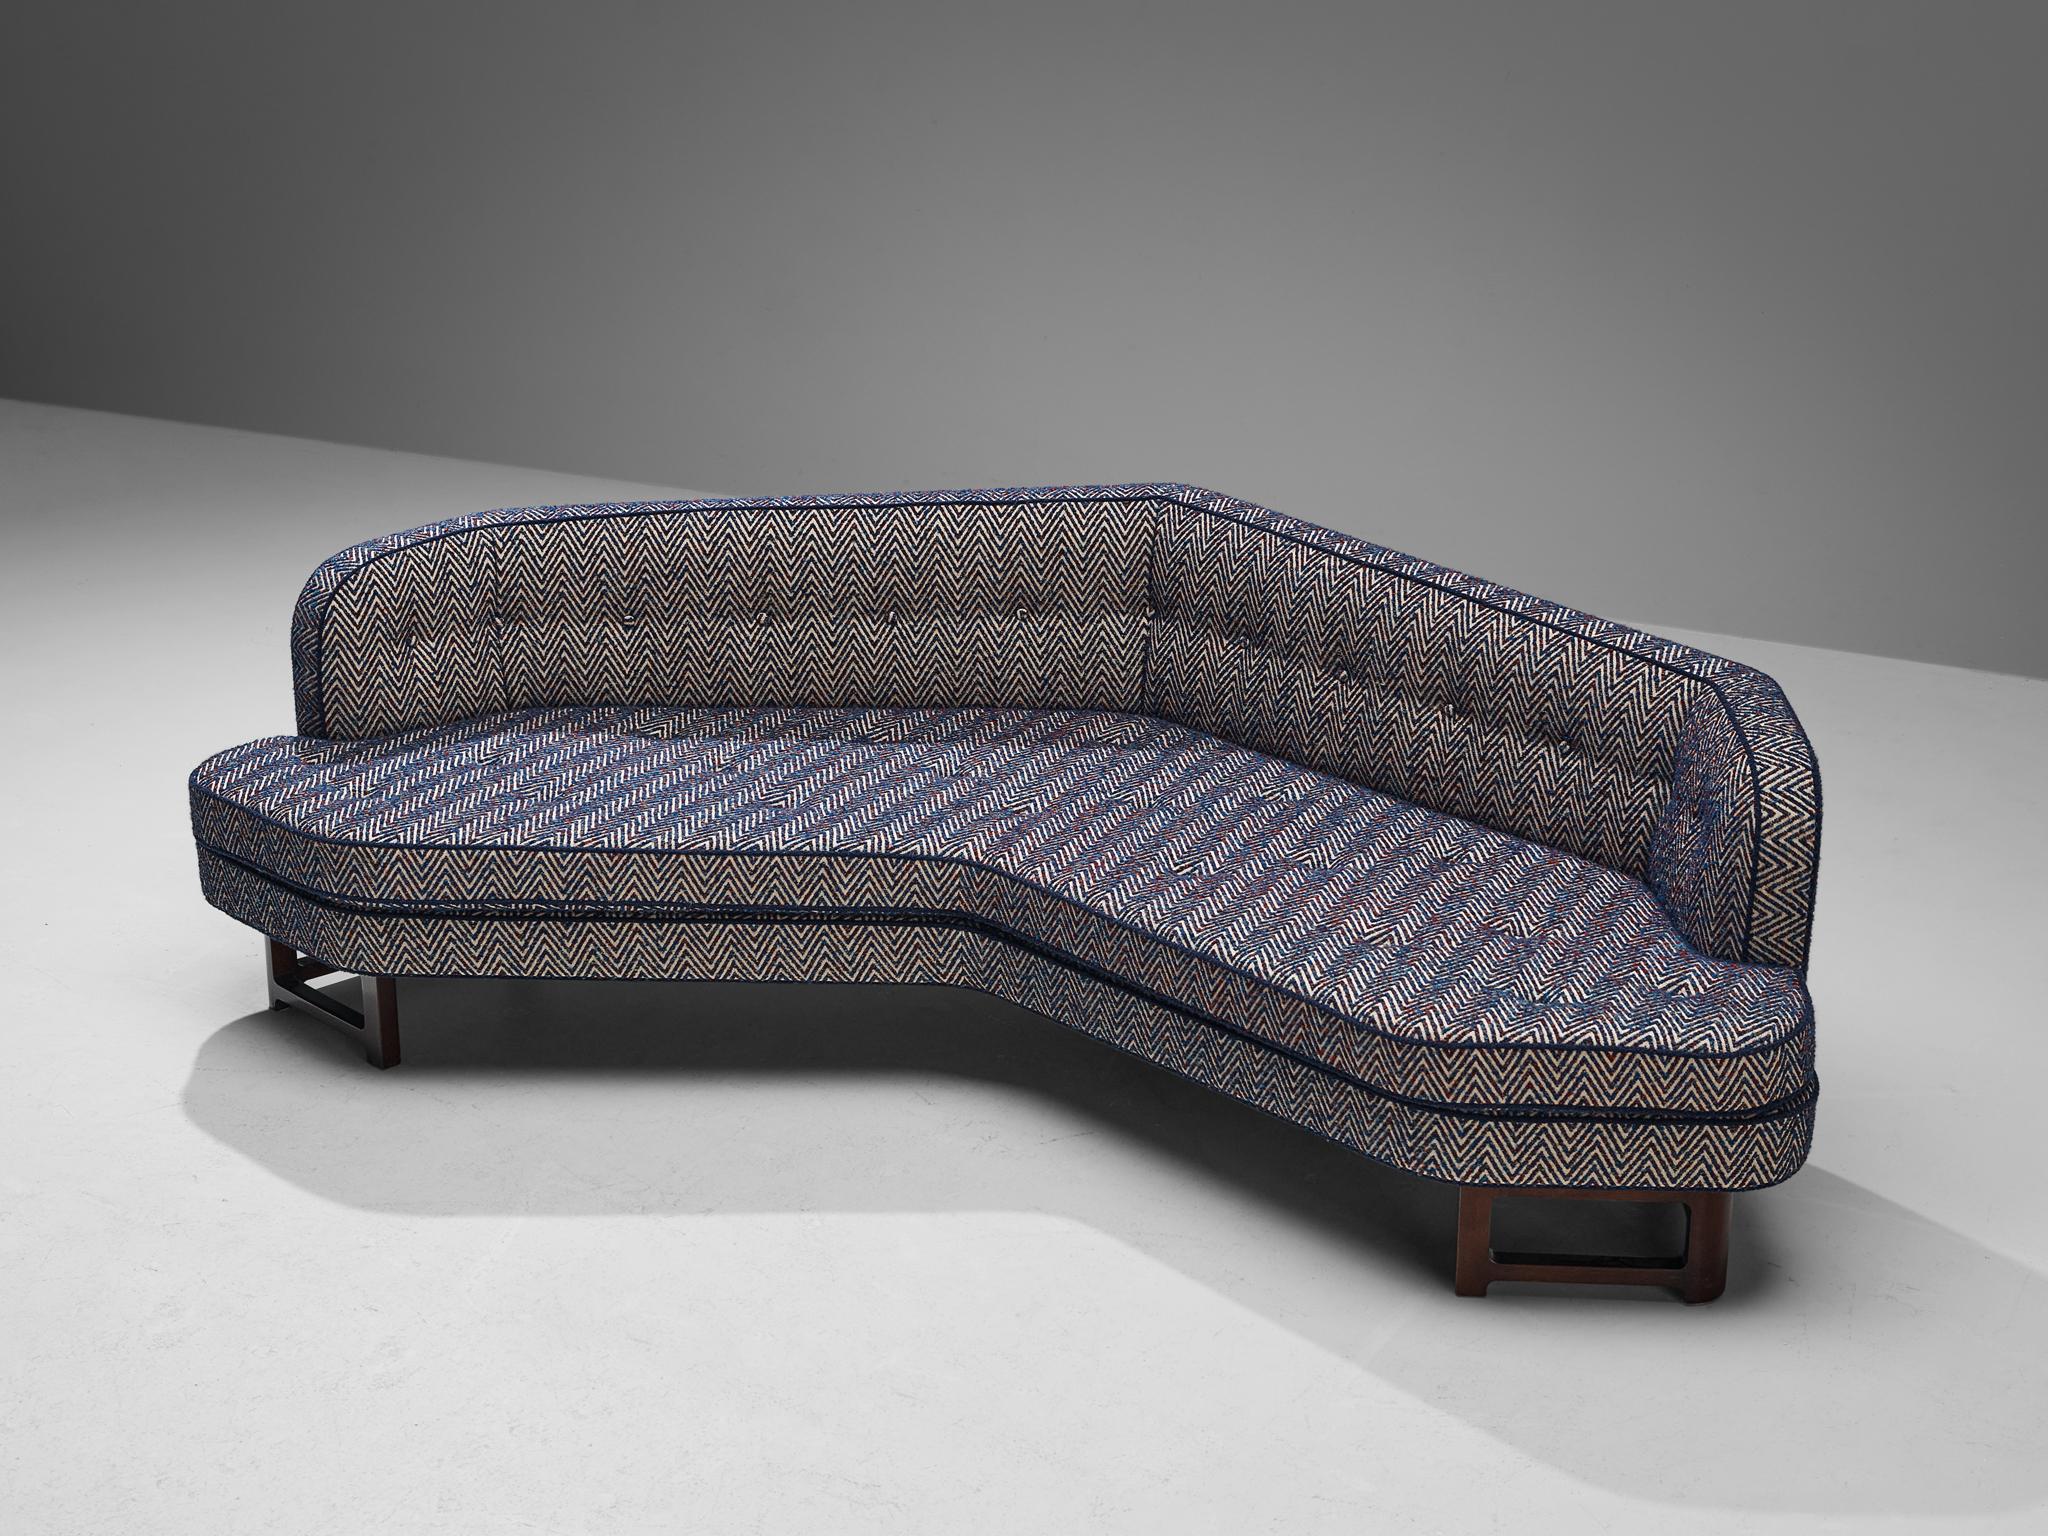 Edward Wormley for Dunbar, Janus sofa, model '6392', reupholstered in Evolution21 fabric Brazil Blue, mahogany, United States, 1960s.

Wide angled 'Janus' sofa by Edward Wormley. This sofa has a modern shape and sinuous lines which create a